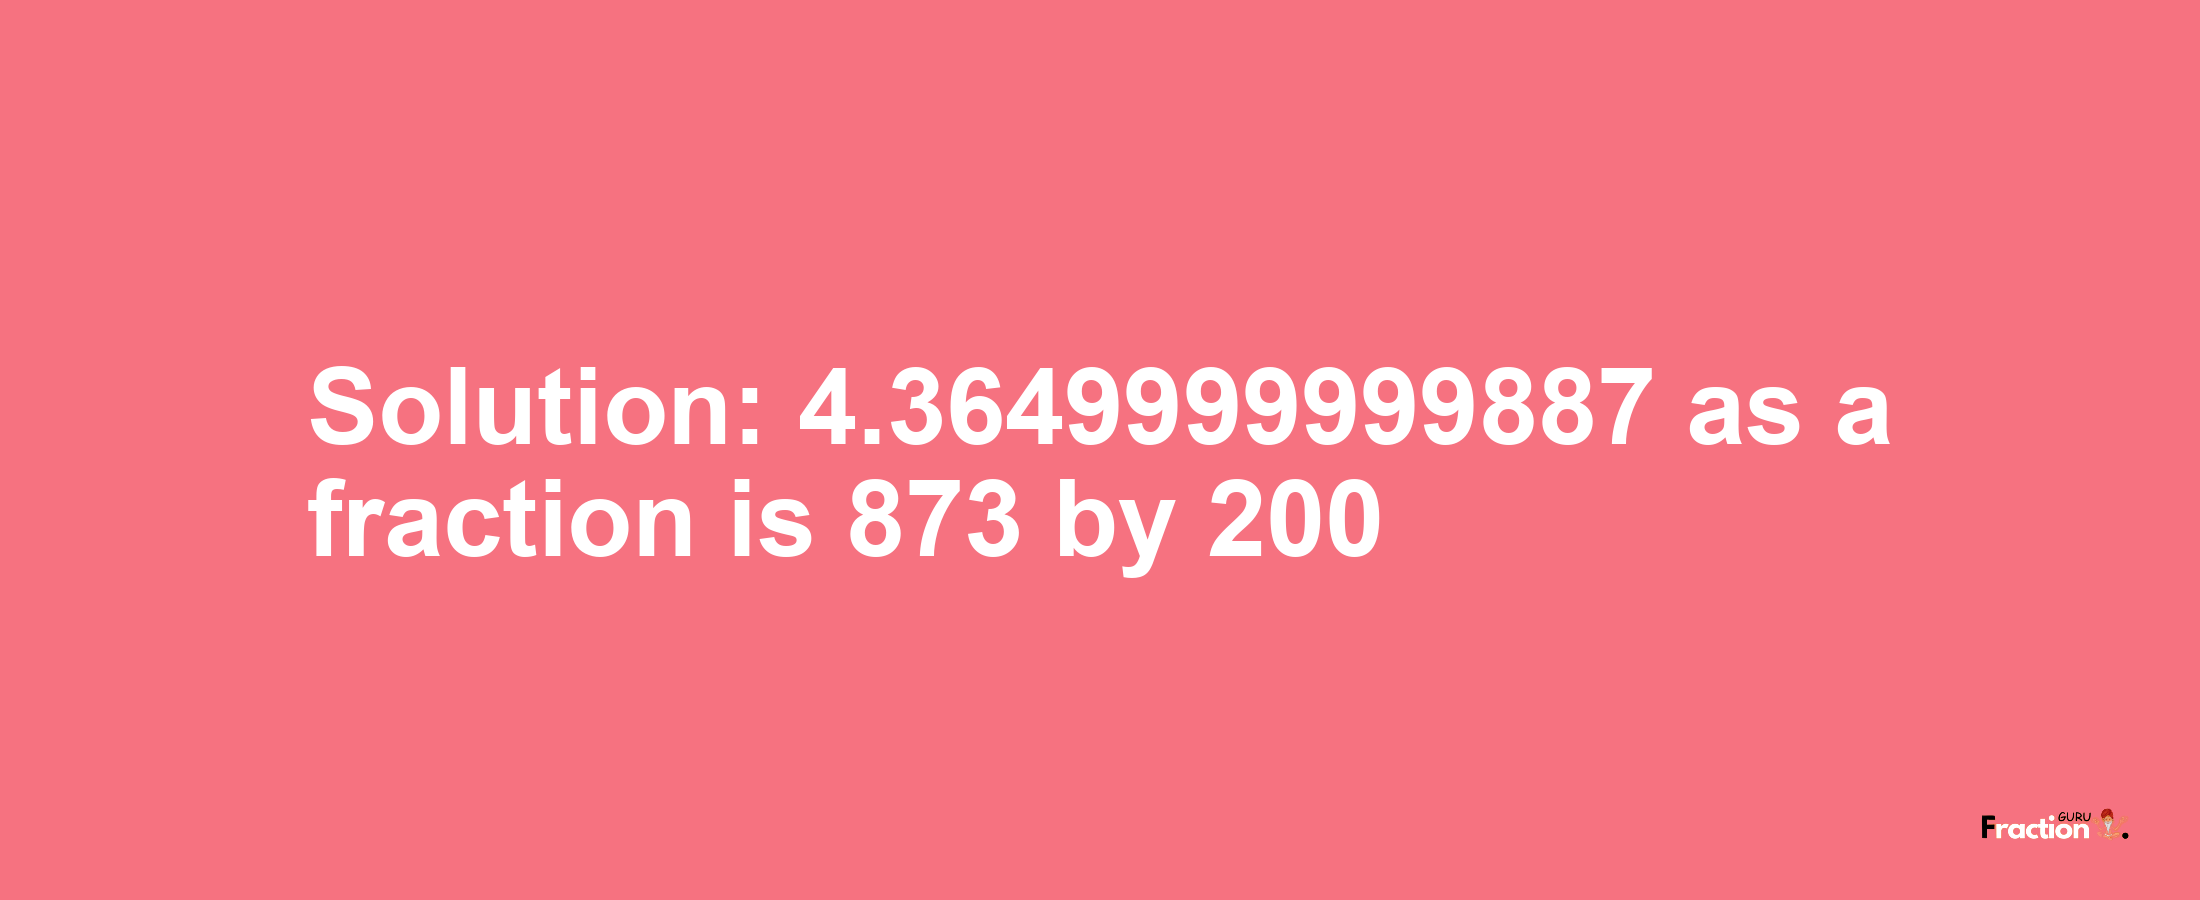 Solution:4.3649999999887 as a fraction is 873/200